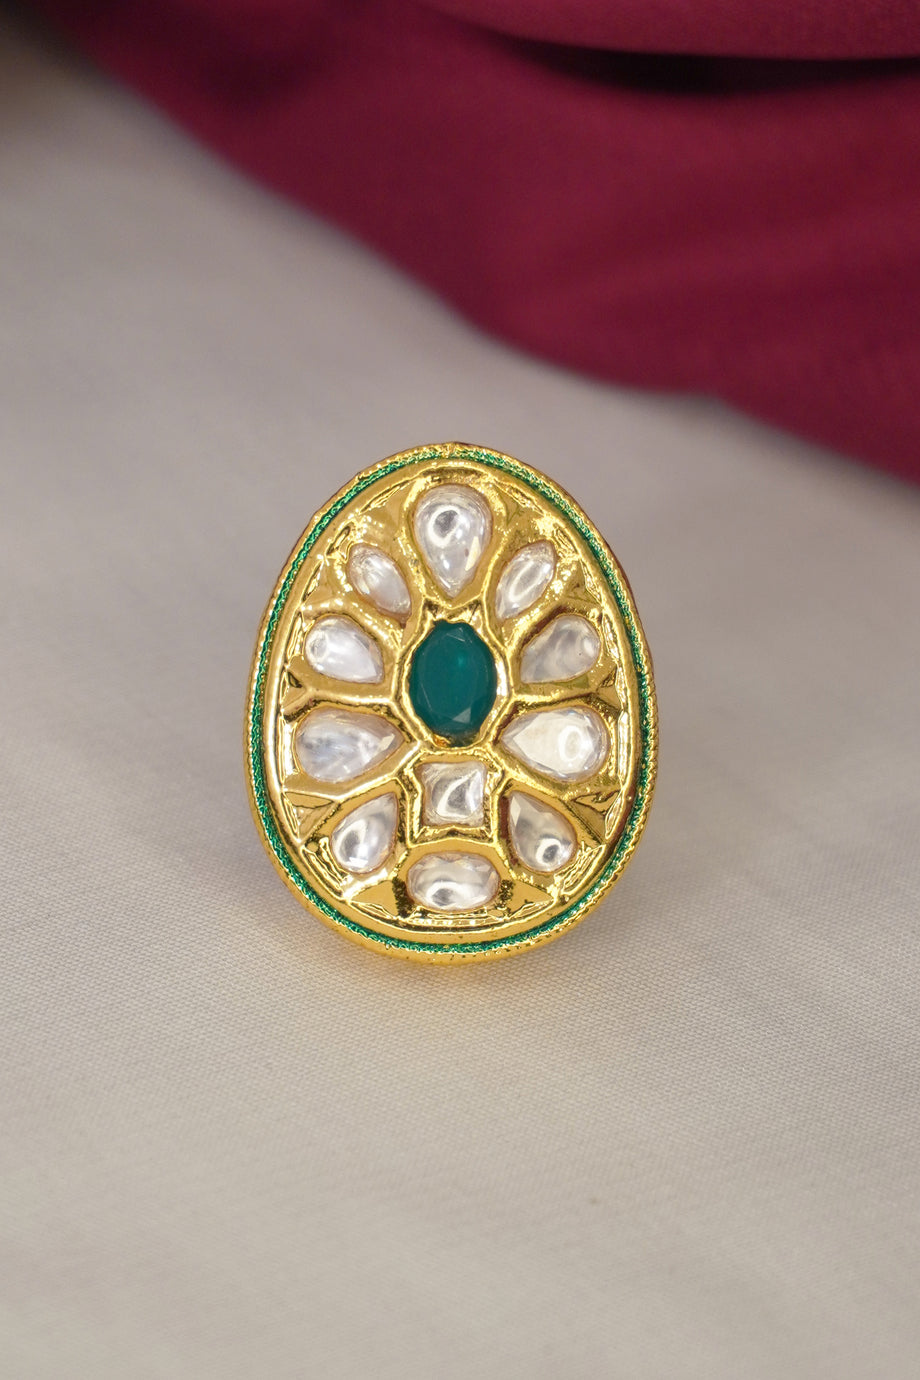 Statement Tayani Inspired Kundan Ring in an Elegant and Sophisticated Design.  Nano Pearl Piroyi on the Edge Studded With Kundans and Rubies. - Etsy